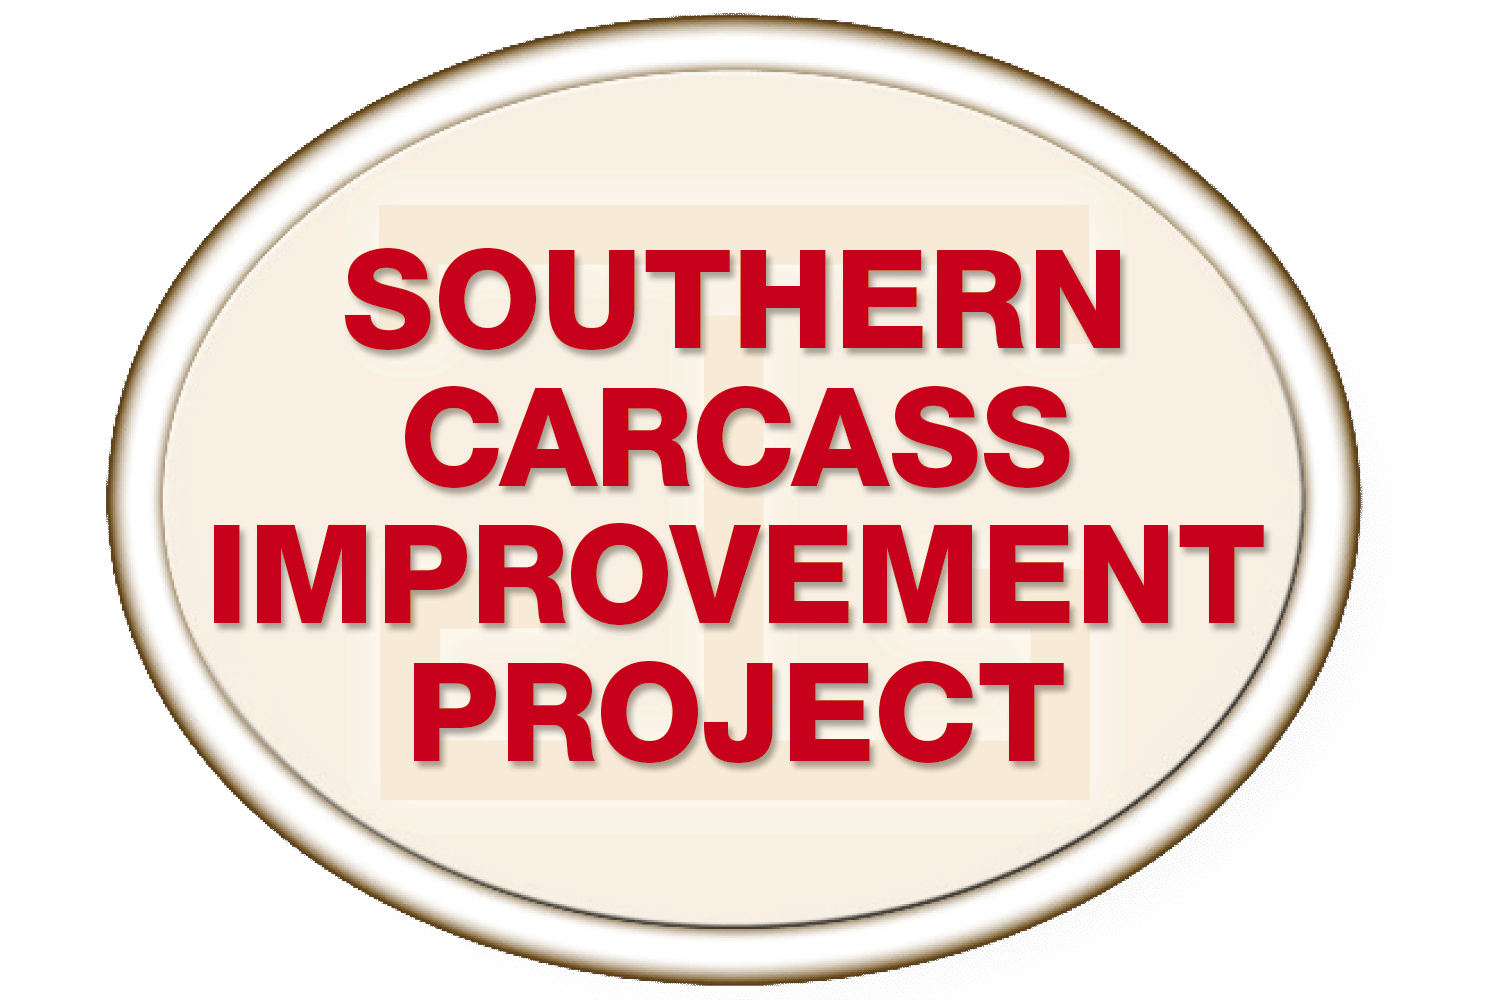 Southern Carcass Improvement Project